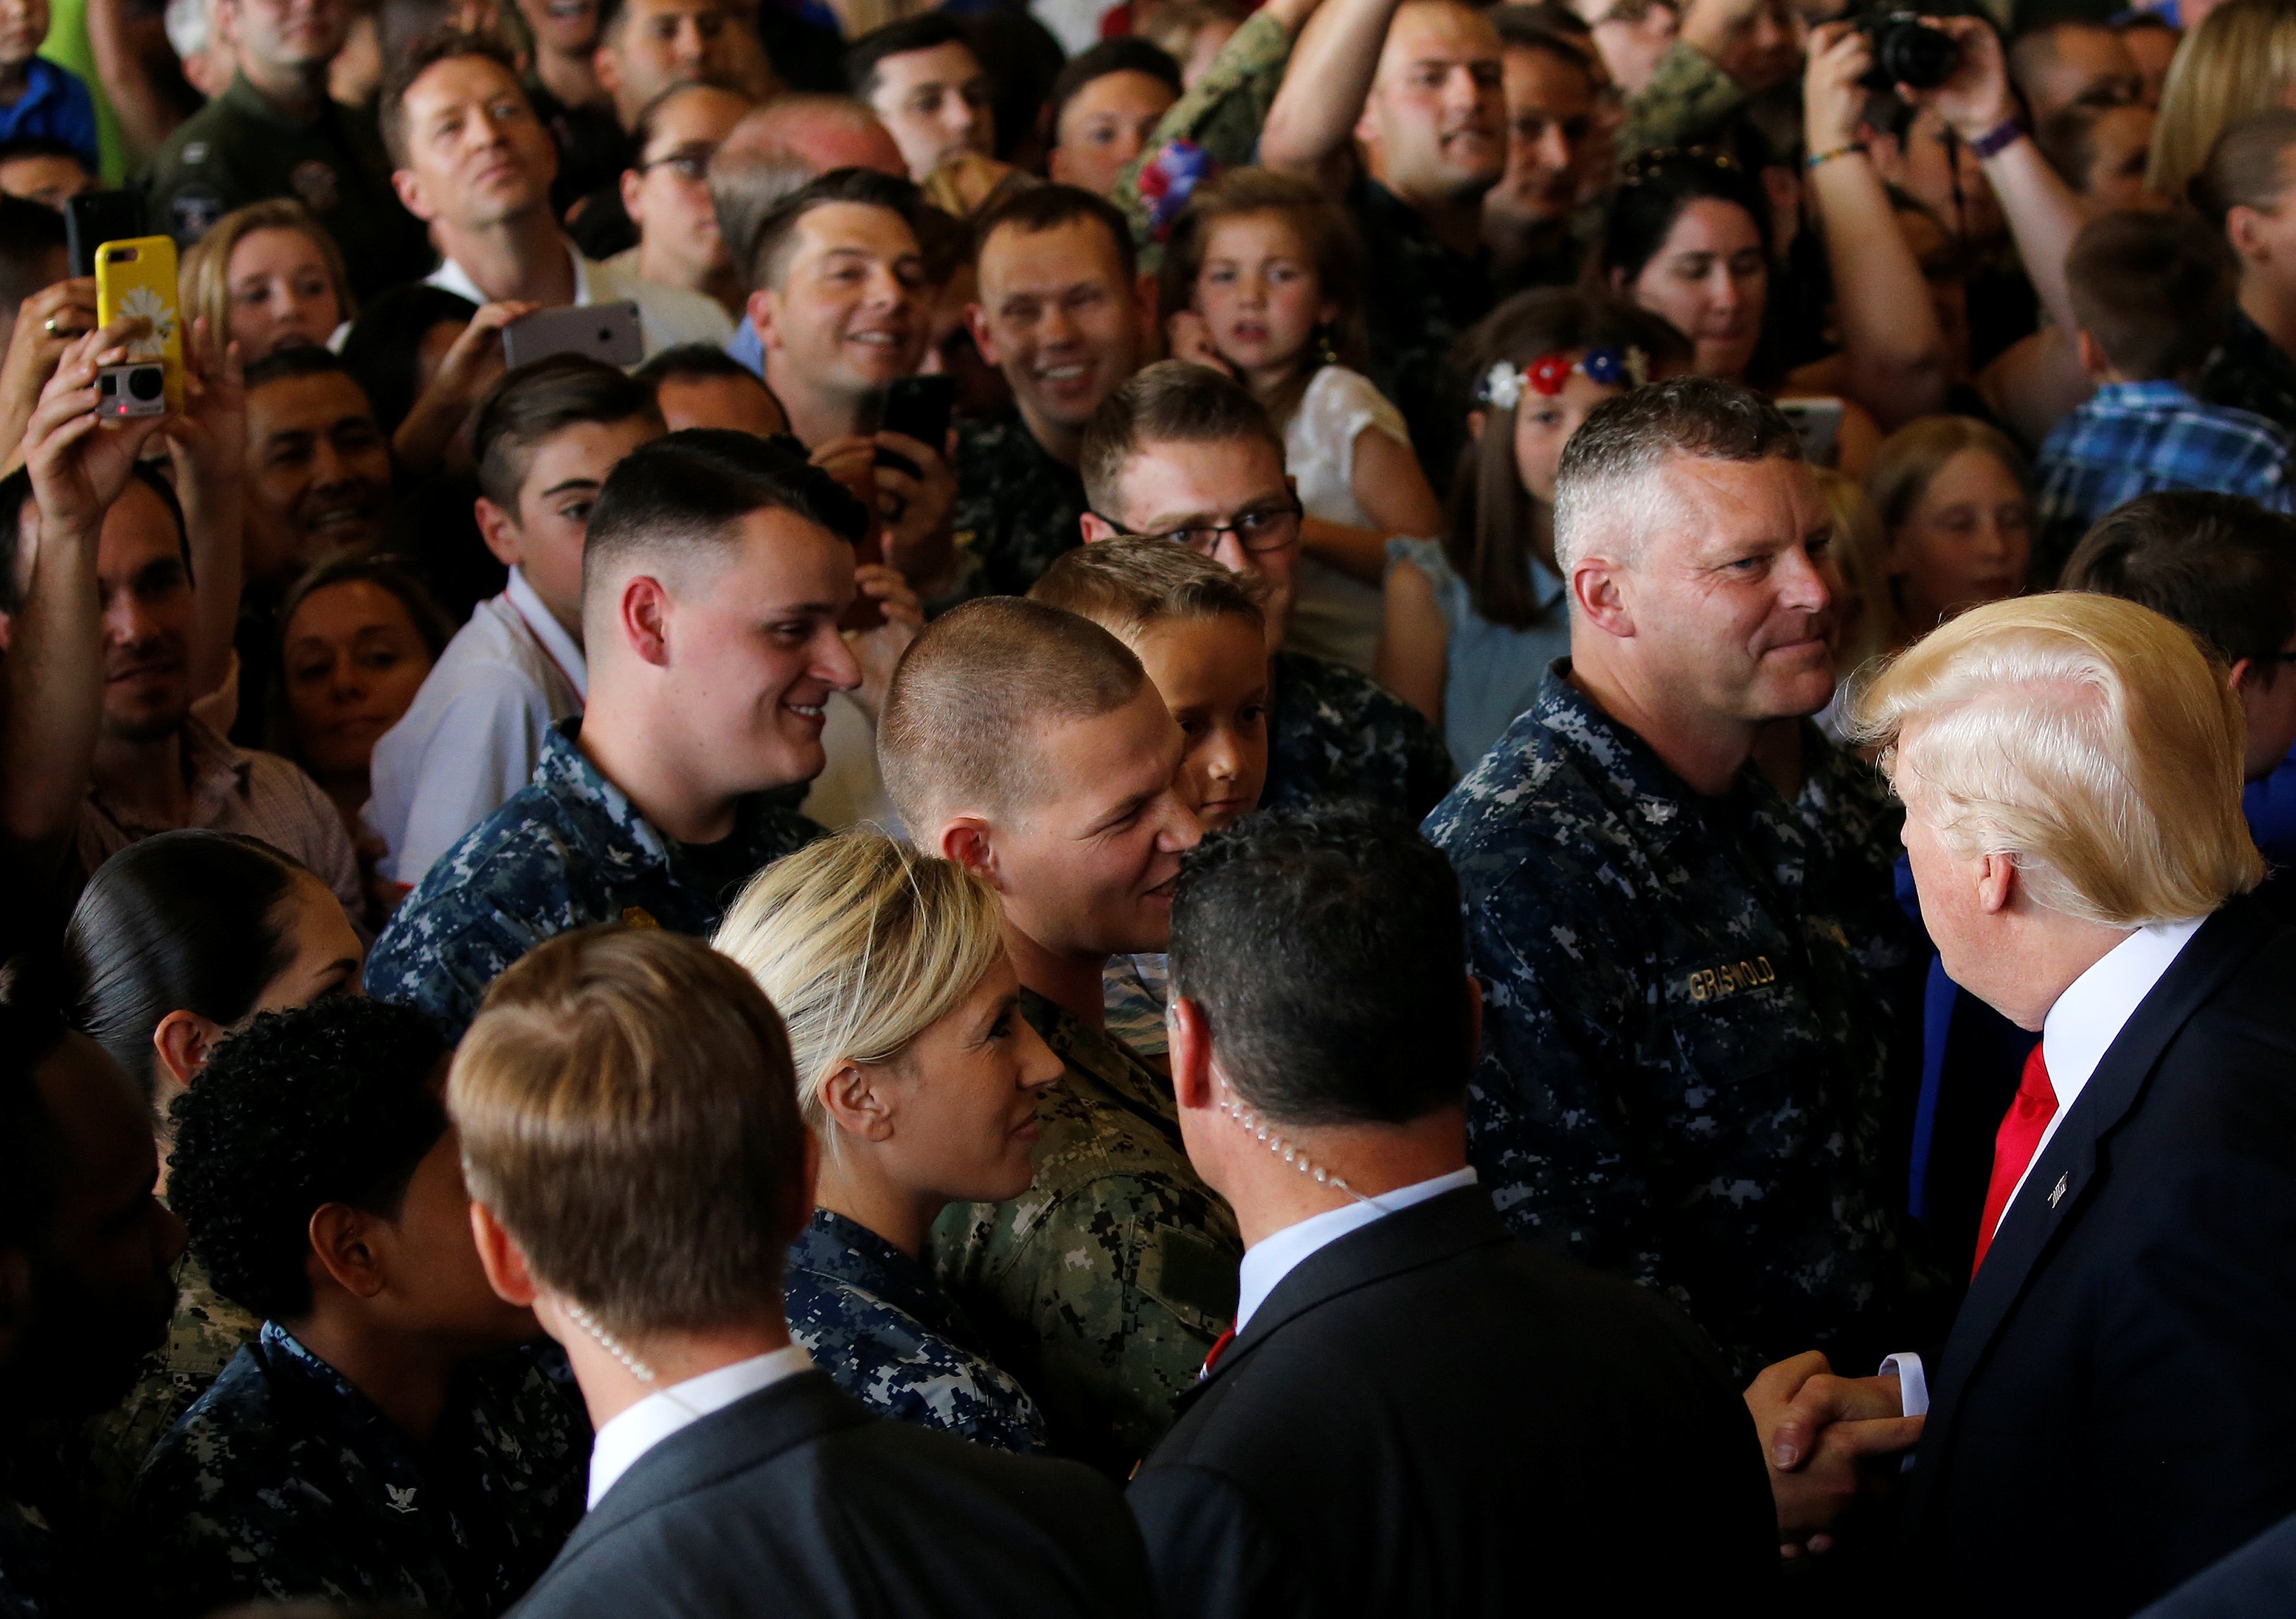 President Trump greets U.S. troops and their families at the Naval Air Station Sigonella before returning to Washington D.C. at Sigonella Air Force Base in Sicily, Italy, May 27, 2017.